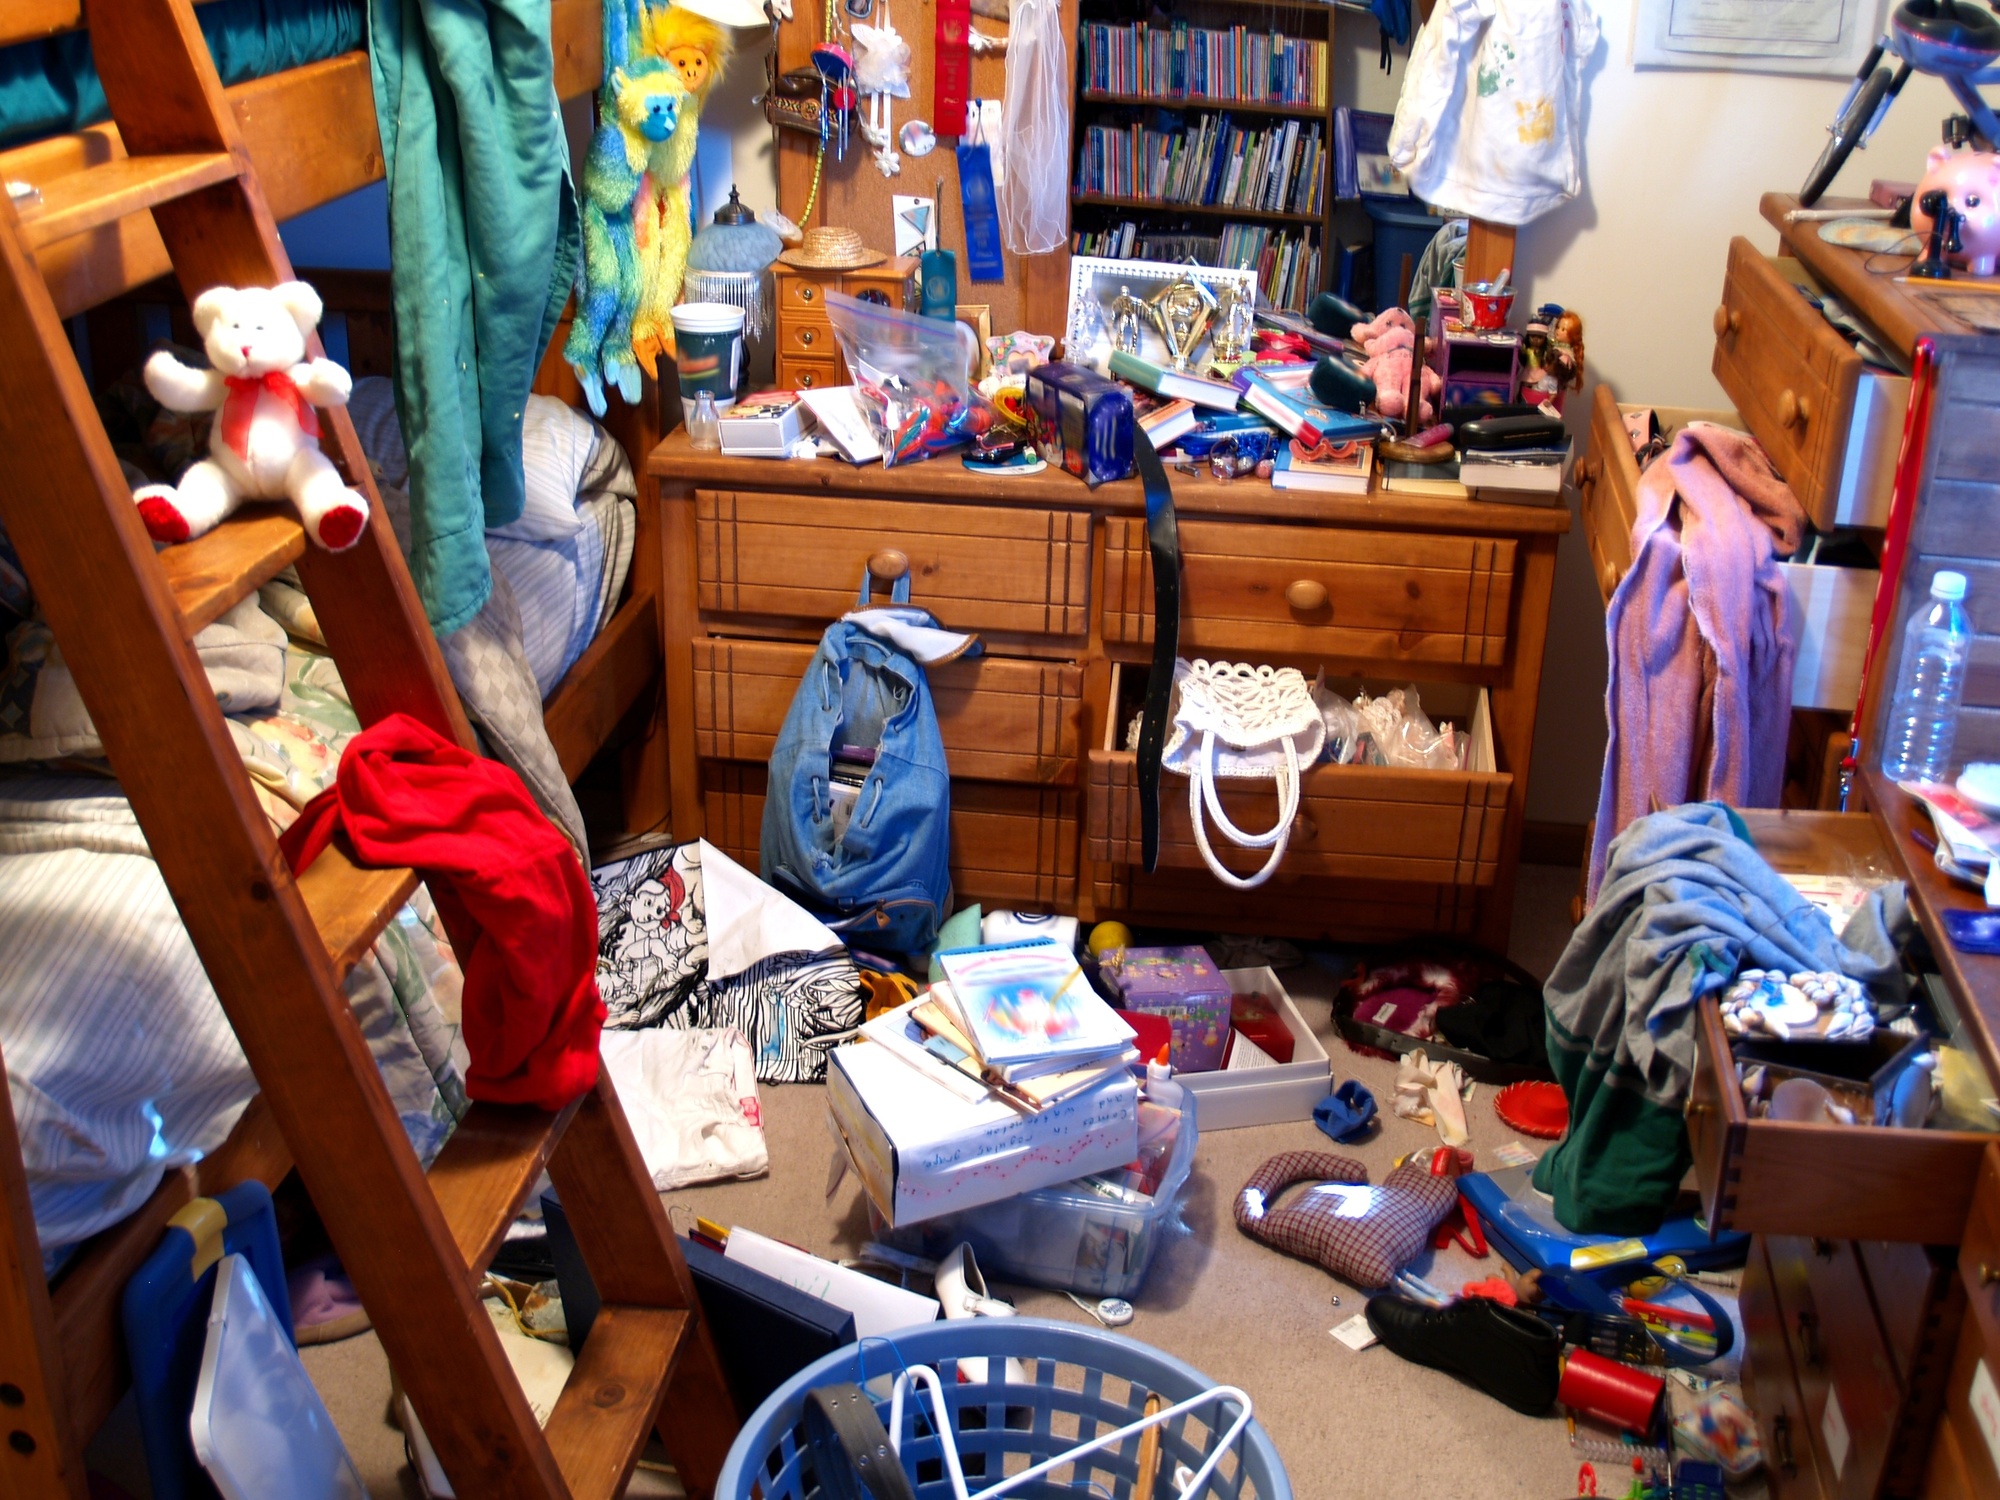 Disorganized Room with Lots of Junk